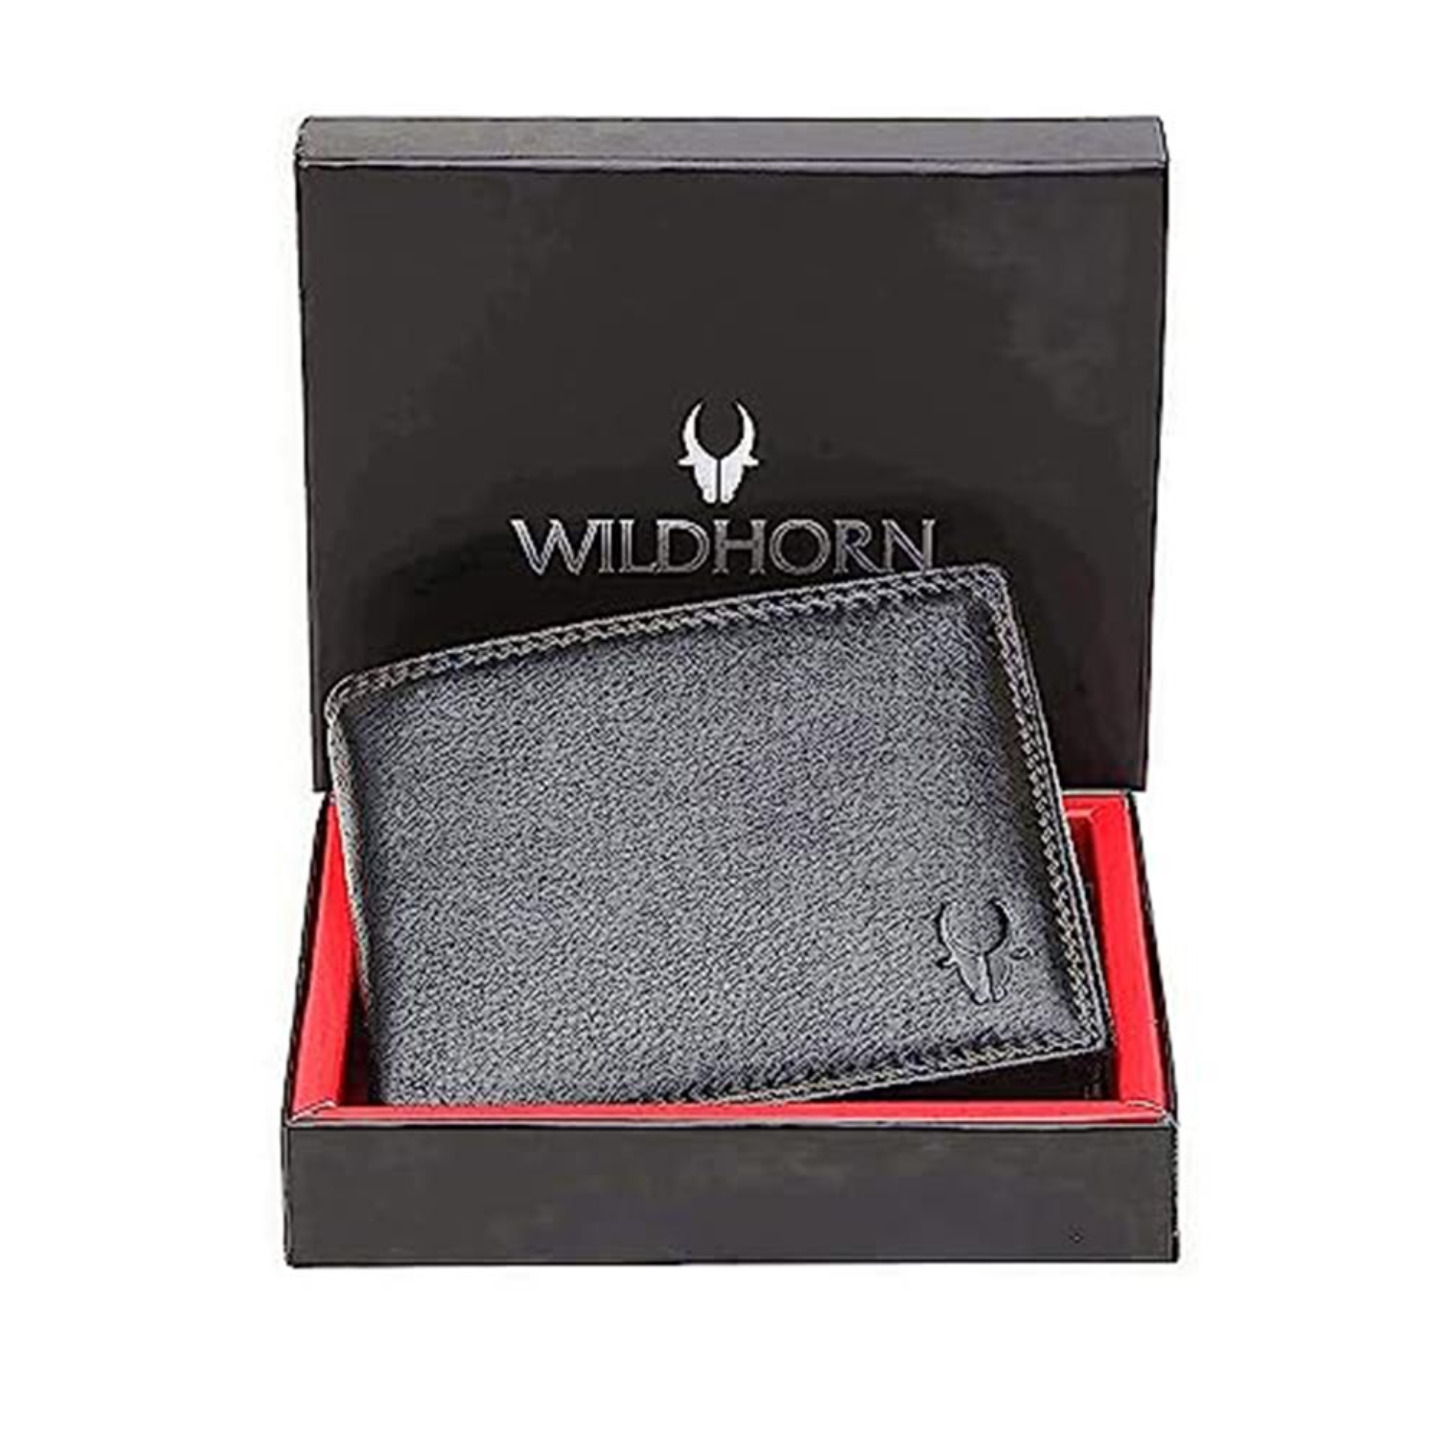 WildHorn Leather Wallet for Men I 4 CreditDebit Card Slots I 2 Secret compartments I 1 Coin Pocket & 2 Currency Compartments